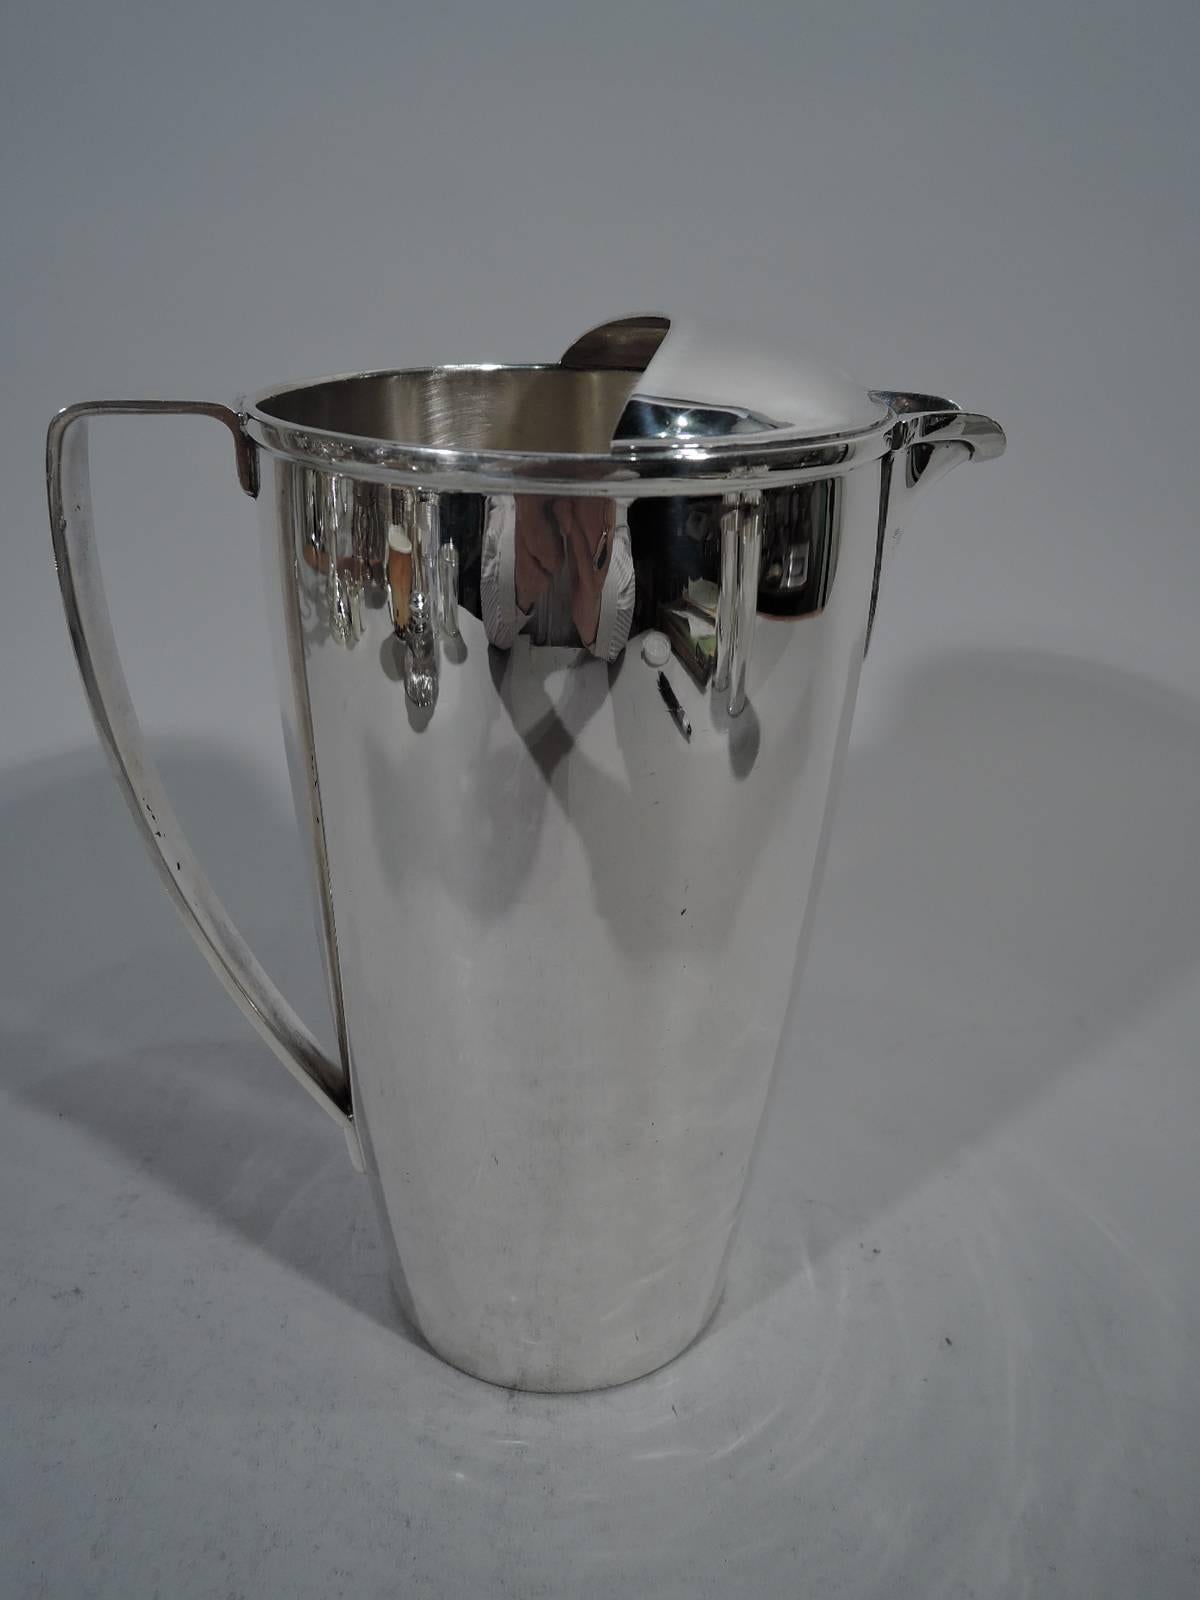 Classic Midcentury Modern sterling silver bar pitcher. Gently curved and tapering sides, scrolled bracket handle, and soft u-spout with built-in strainer. Open top with demi-lune ice guard. Hallmark includes pattern no. 23058 and director’s letter M